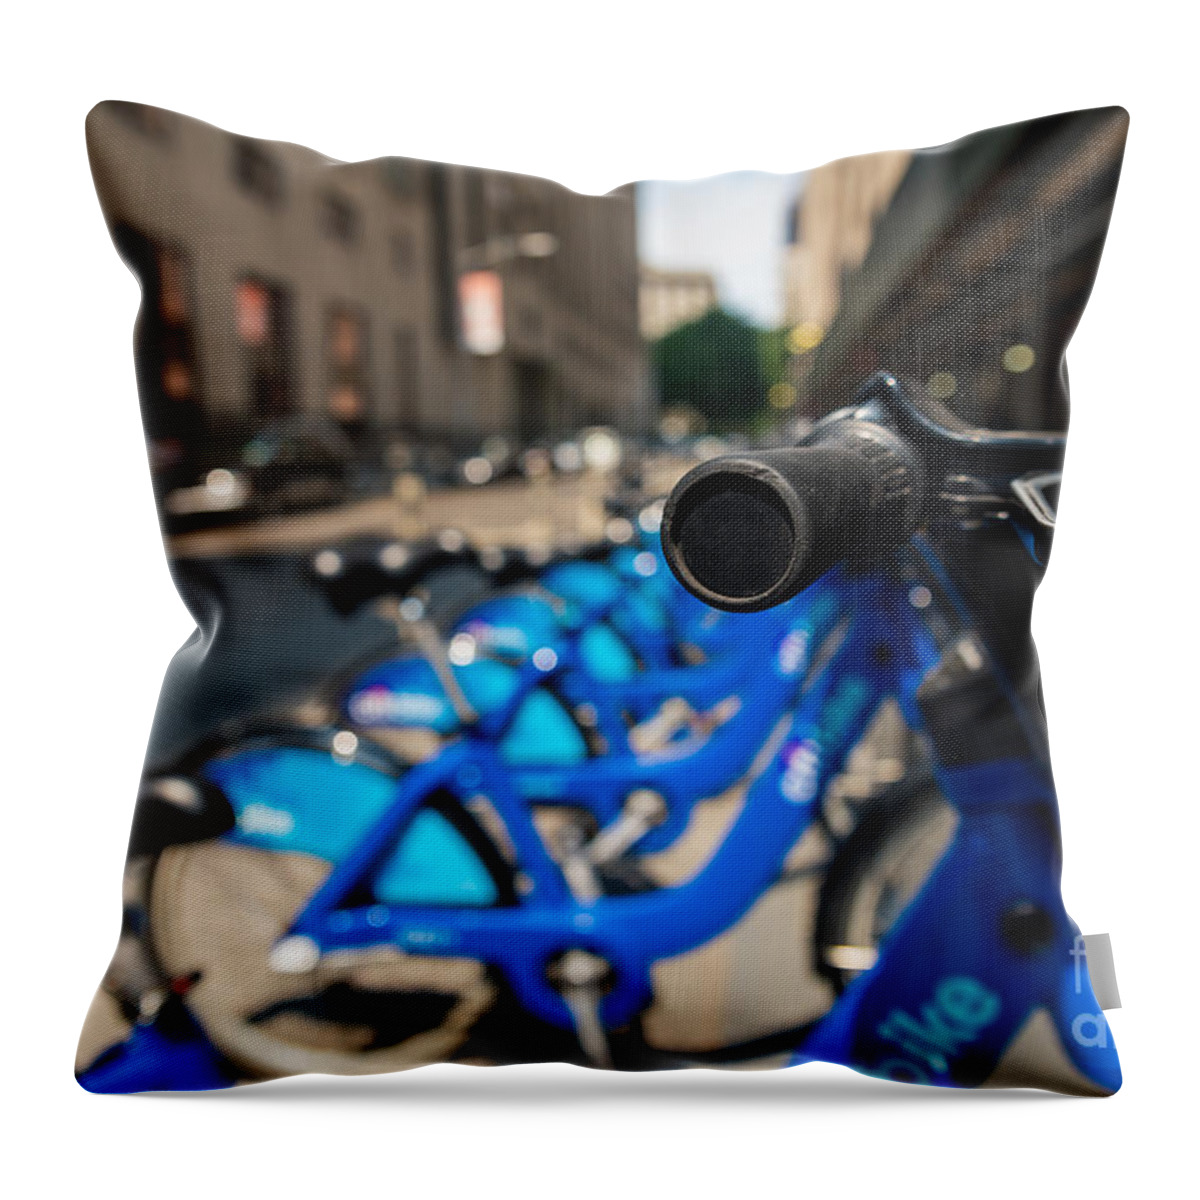 Flatiron Building Throw Pillow featuring the photograph Citibike Handle Manhattan Color by Alissa Beth Photography